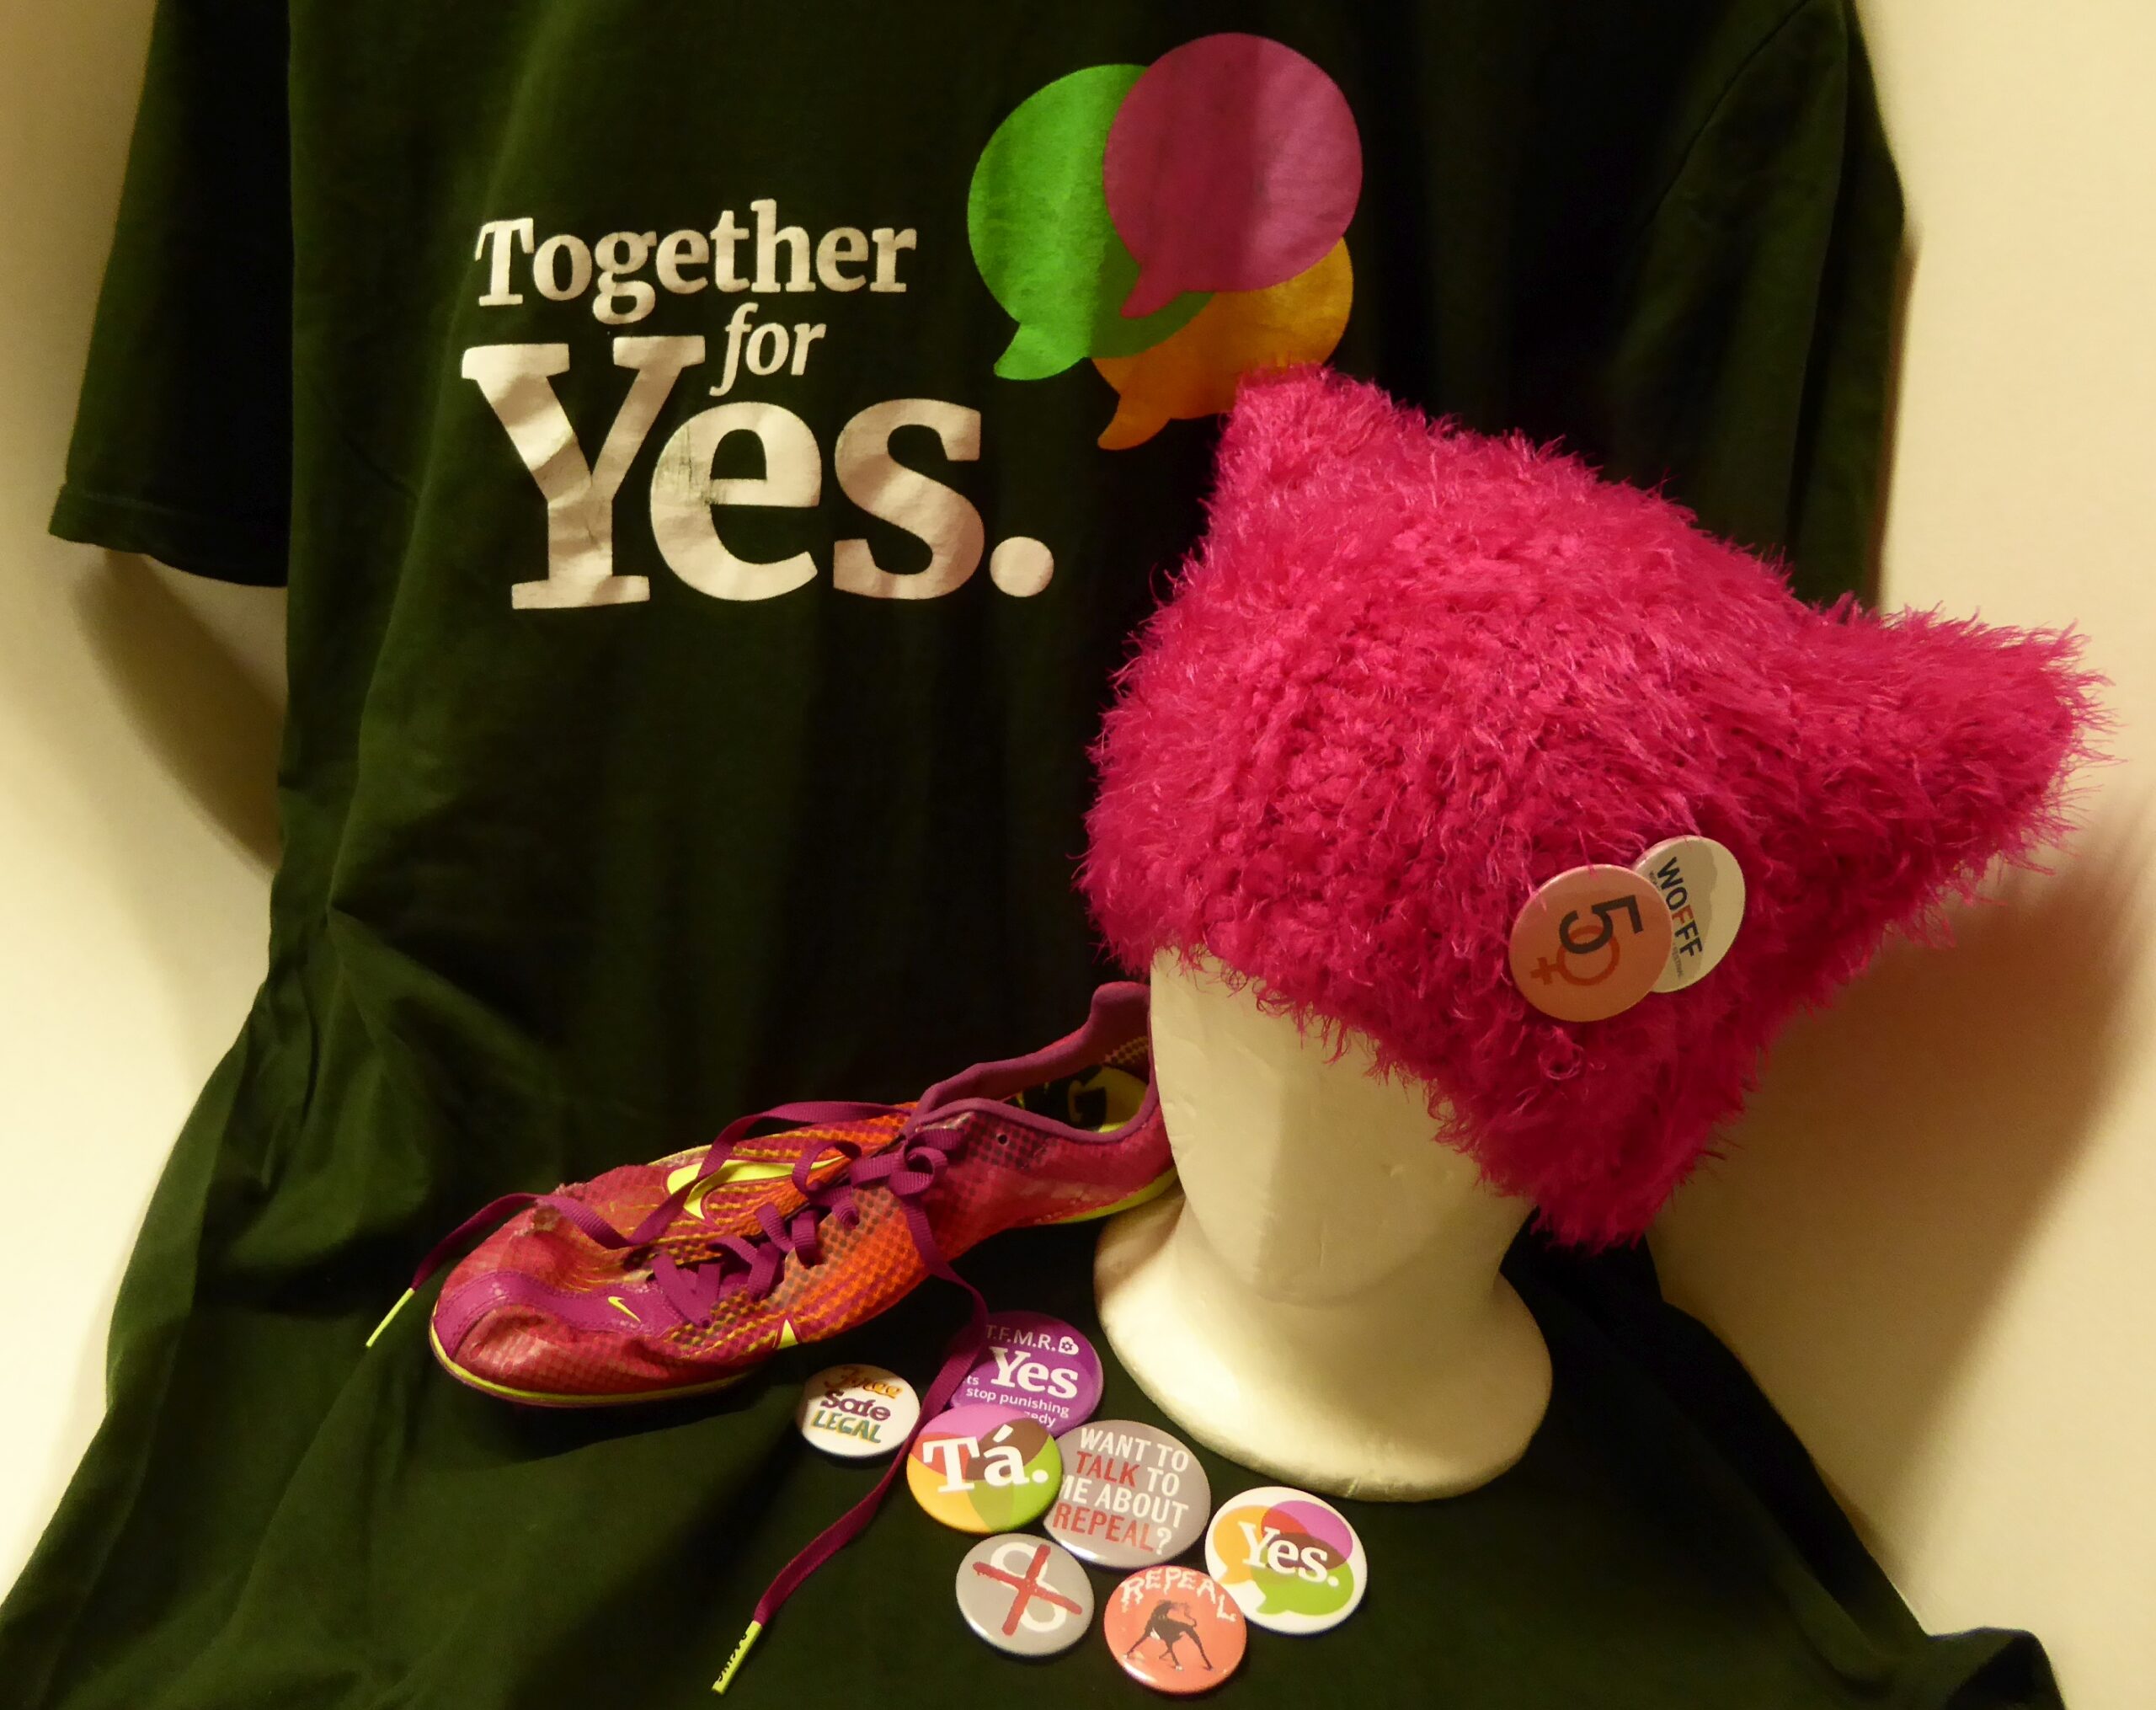 Recent Rapid Response additions to our museum collection, including Repeal the 8th campaign material and a pink Women's March Pussy Hat